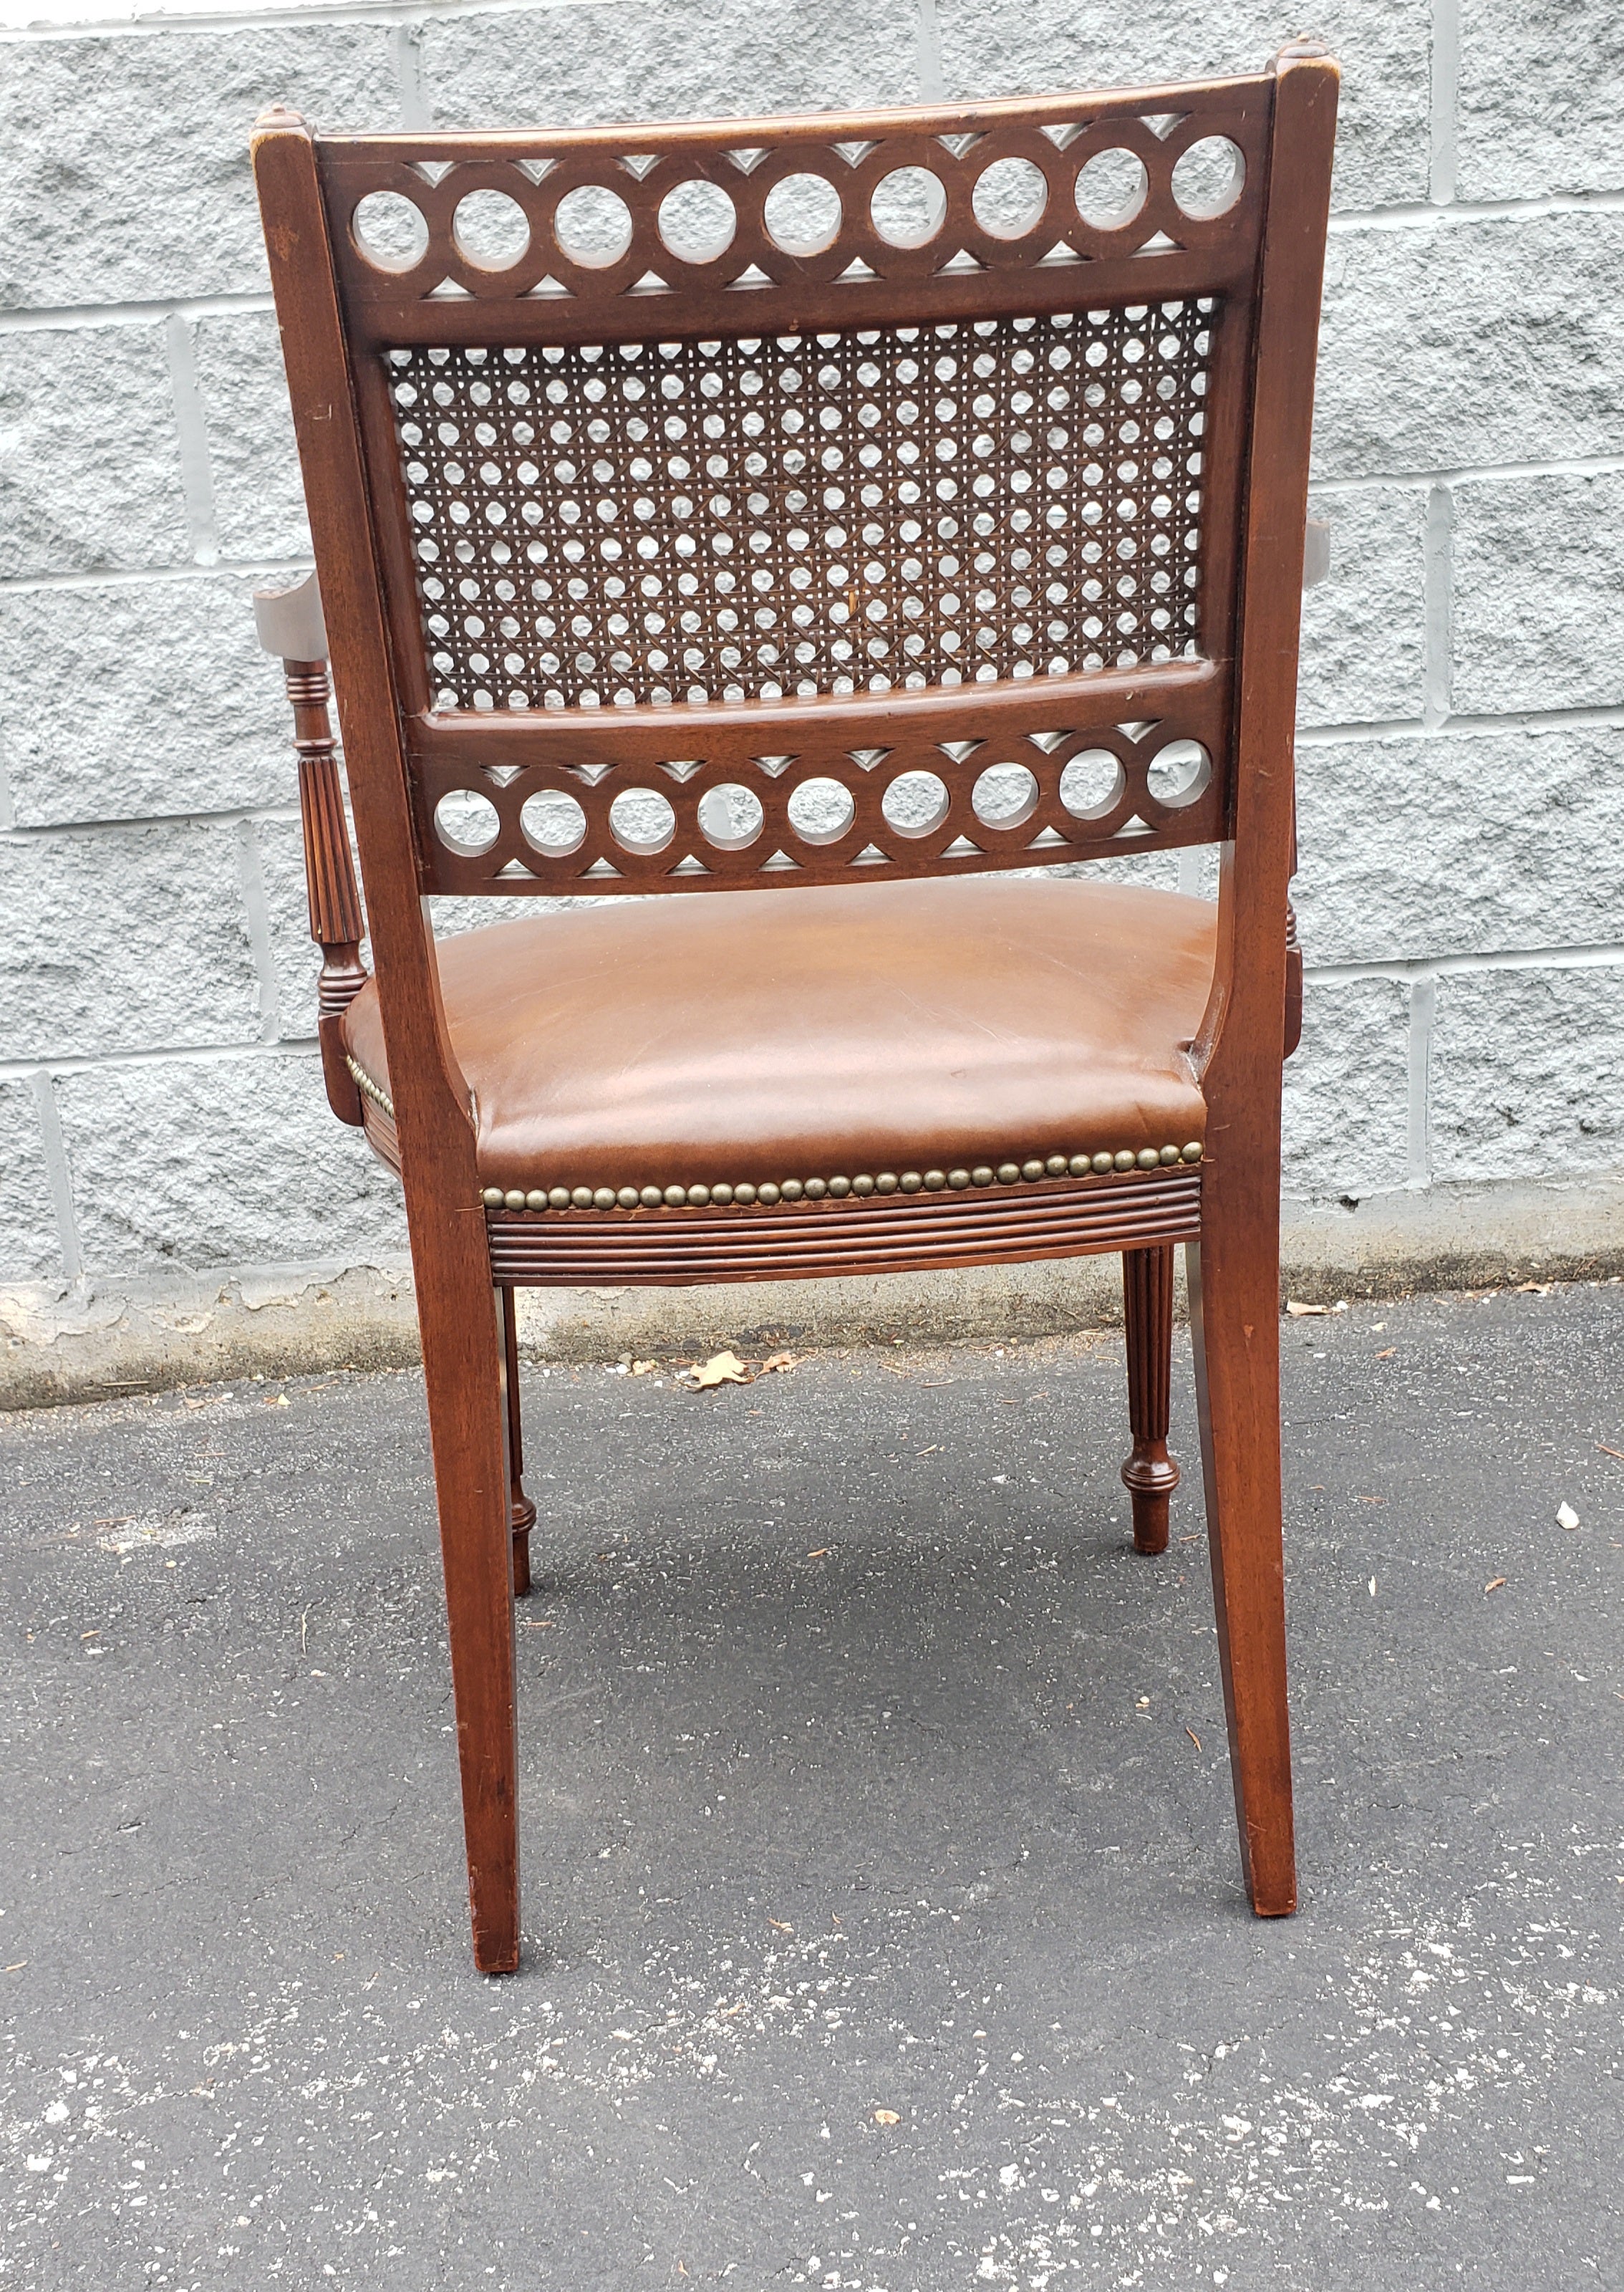 American Midcentury Regency Mahogany Leather Seat with Cane Back Armchair